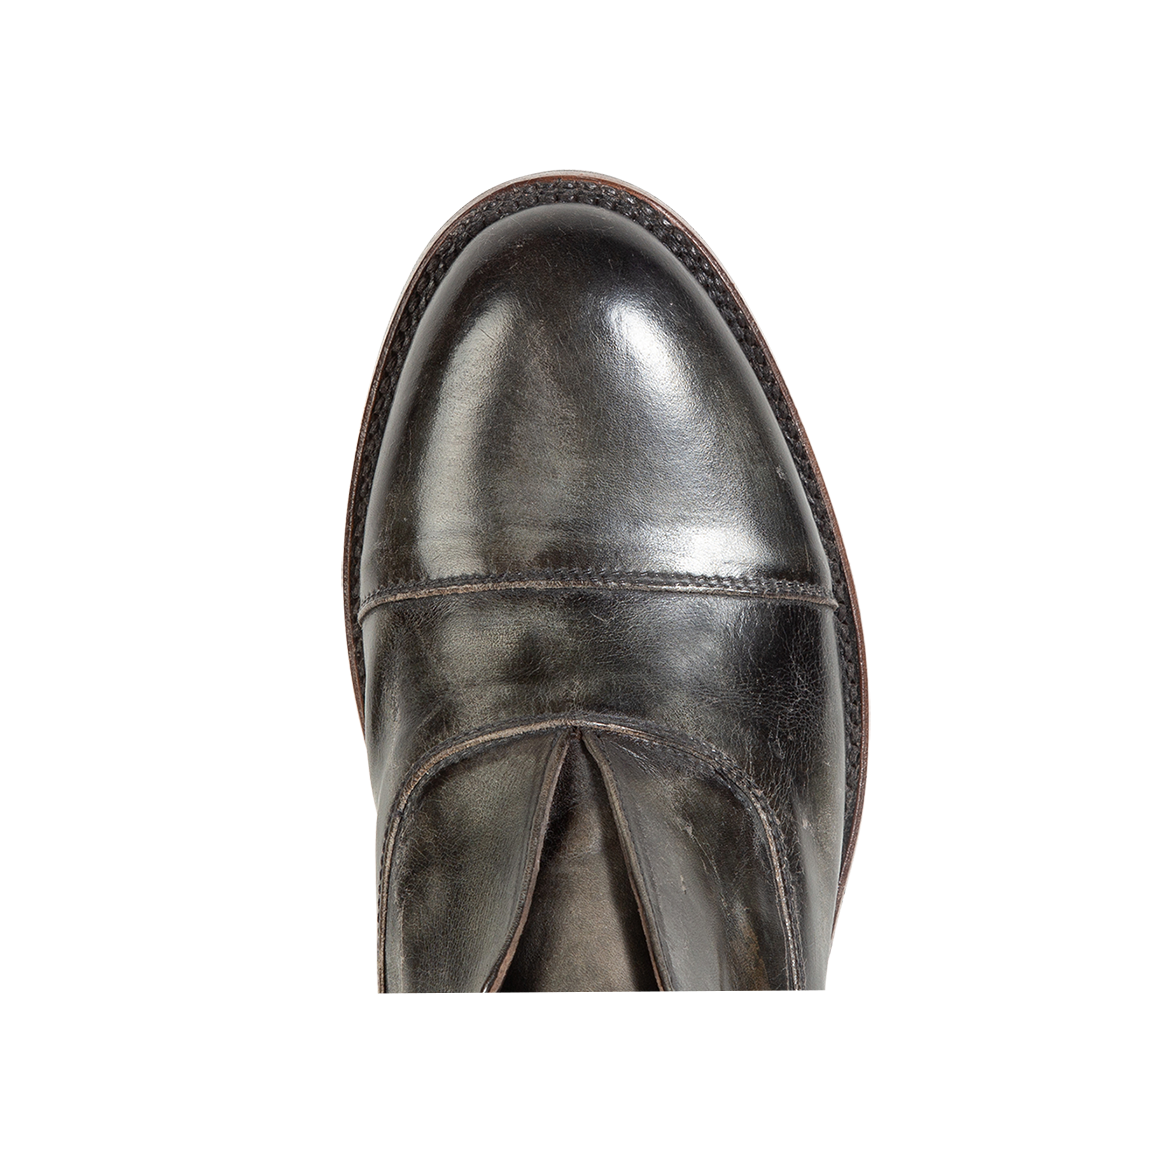 Top view showing almond toe and loafer construction on FREEBIRD men's Detrick olive shoe